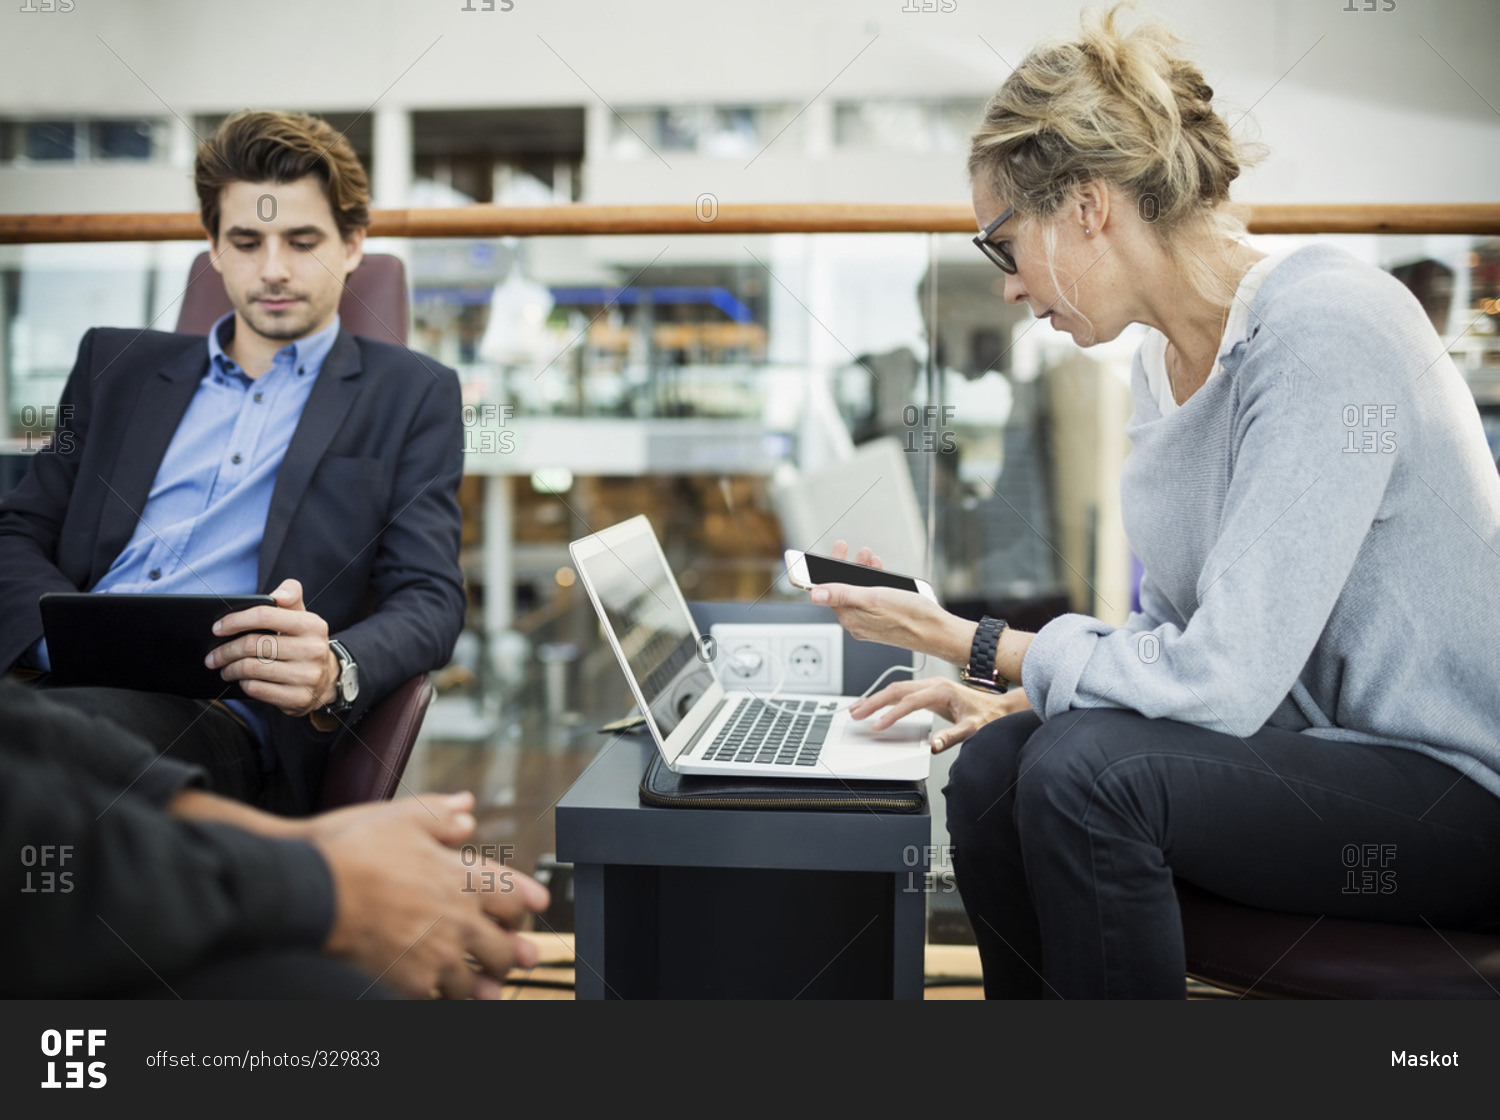 Businesspeople using technologies at airport lobby